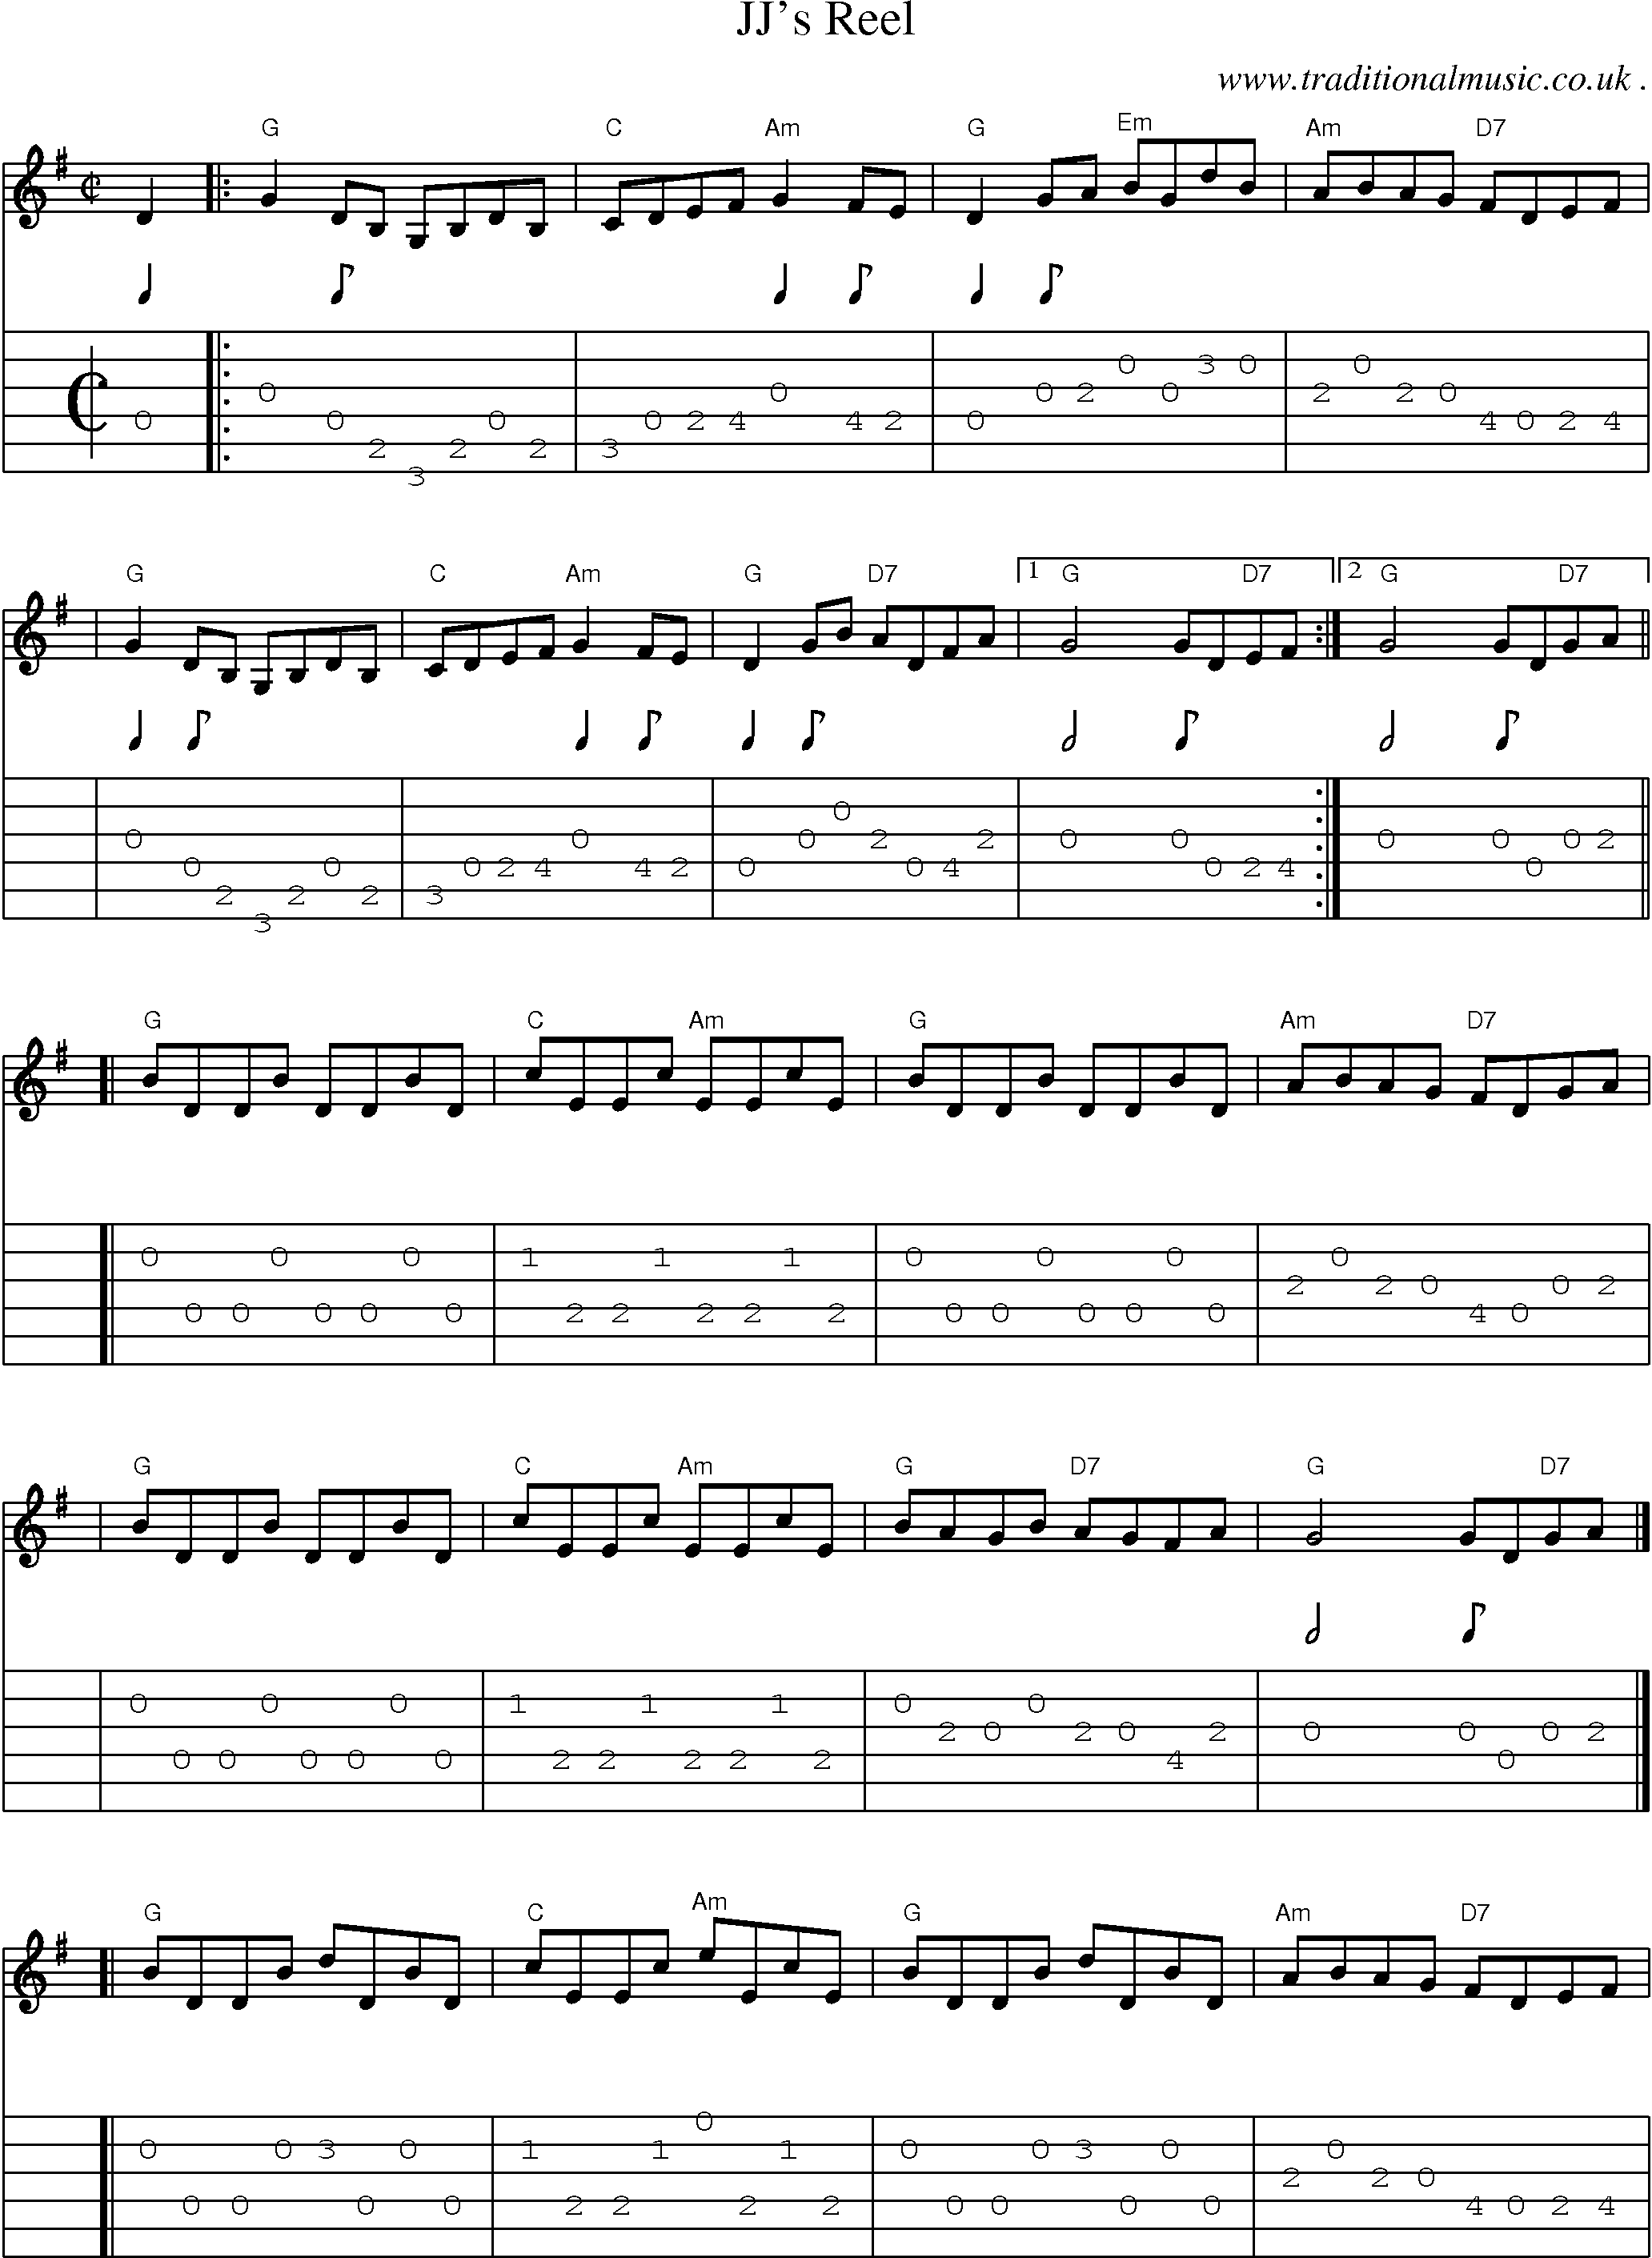 Sheet-music  score, Chords and Guitar Tabs for Jjs Reel